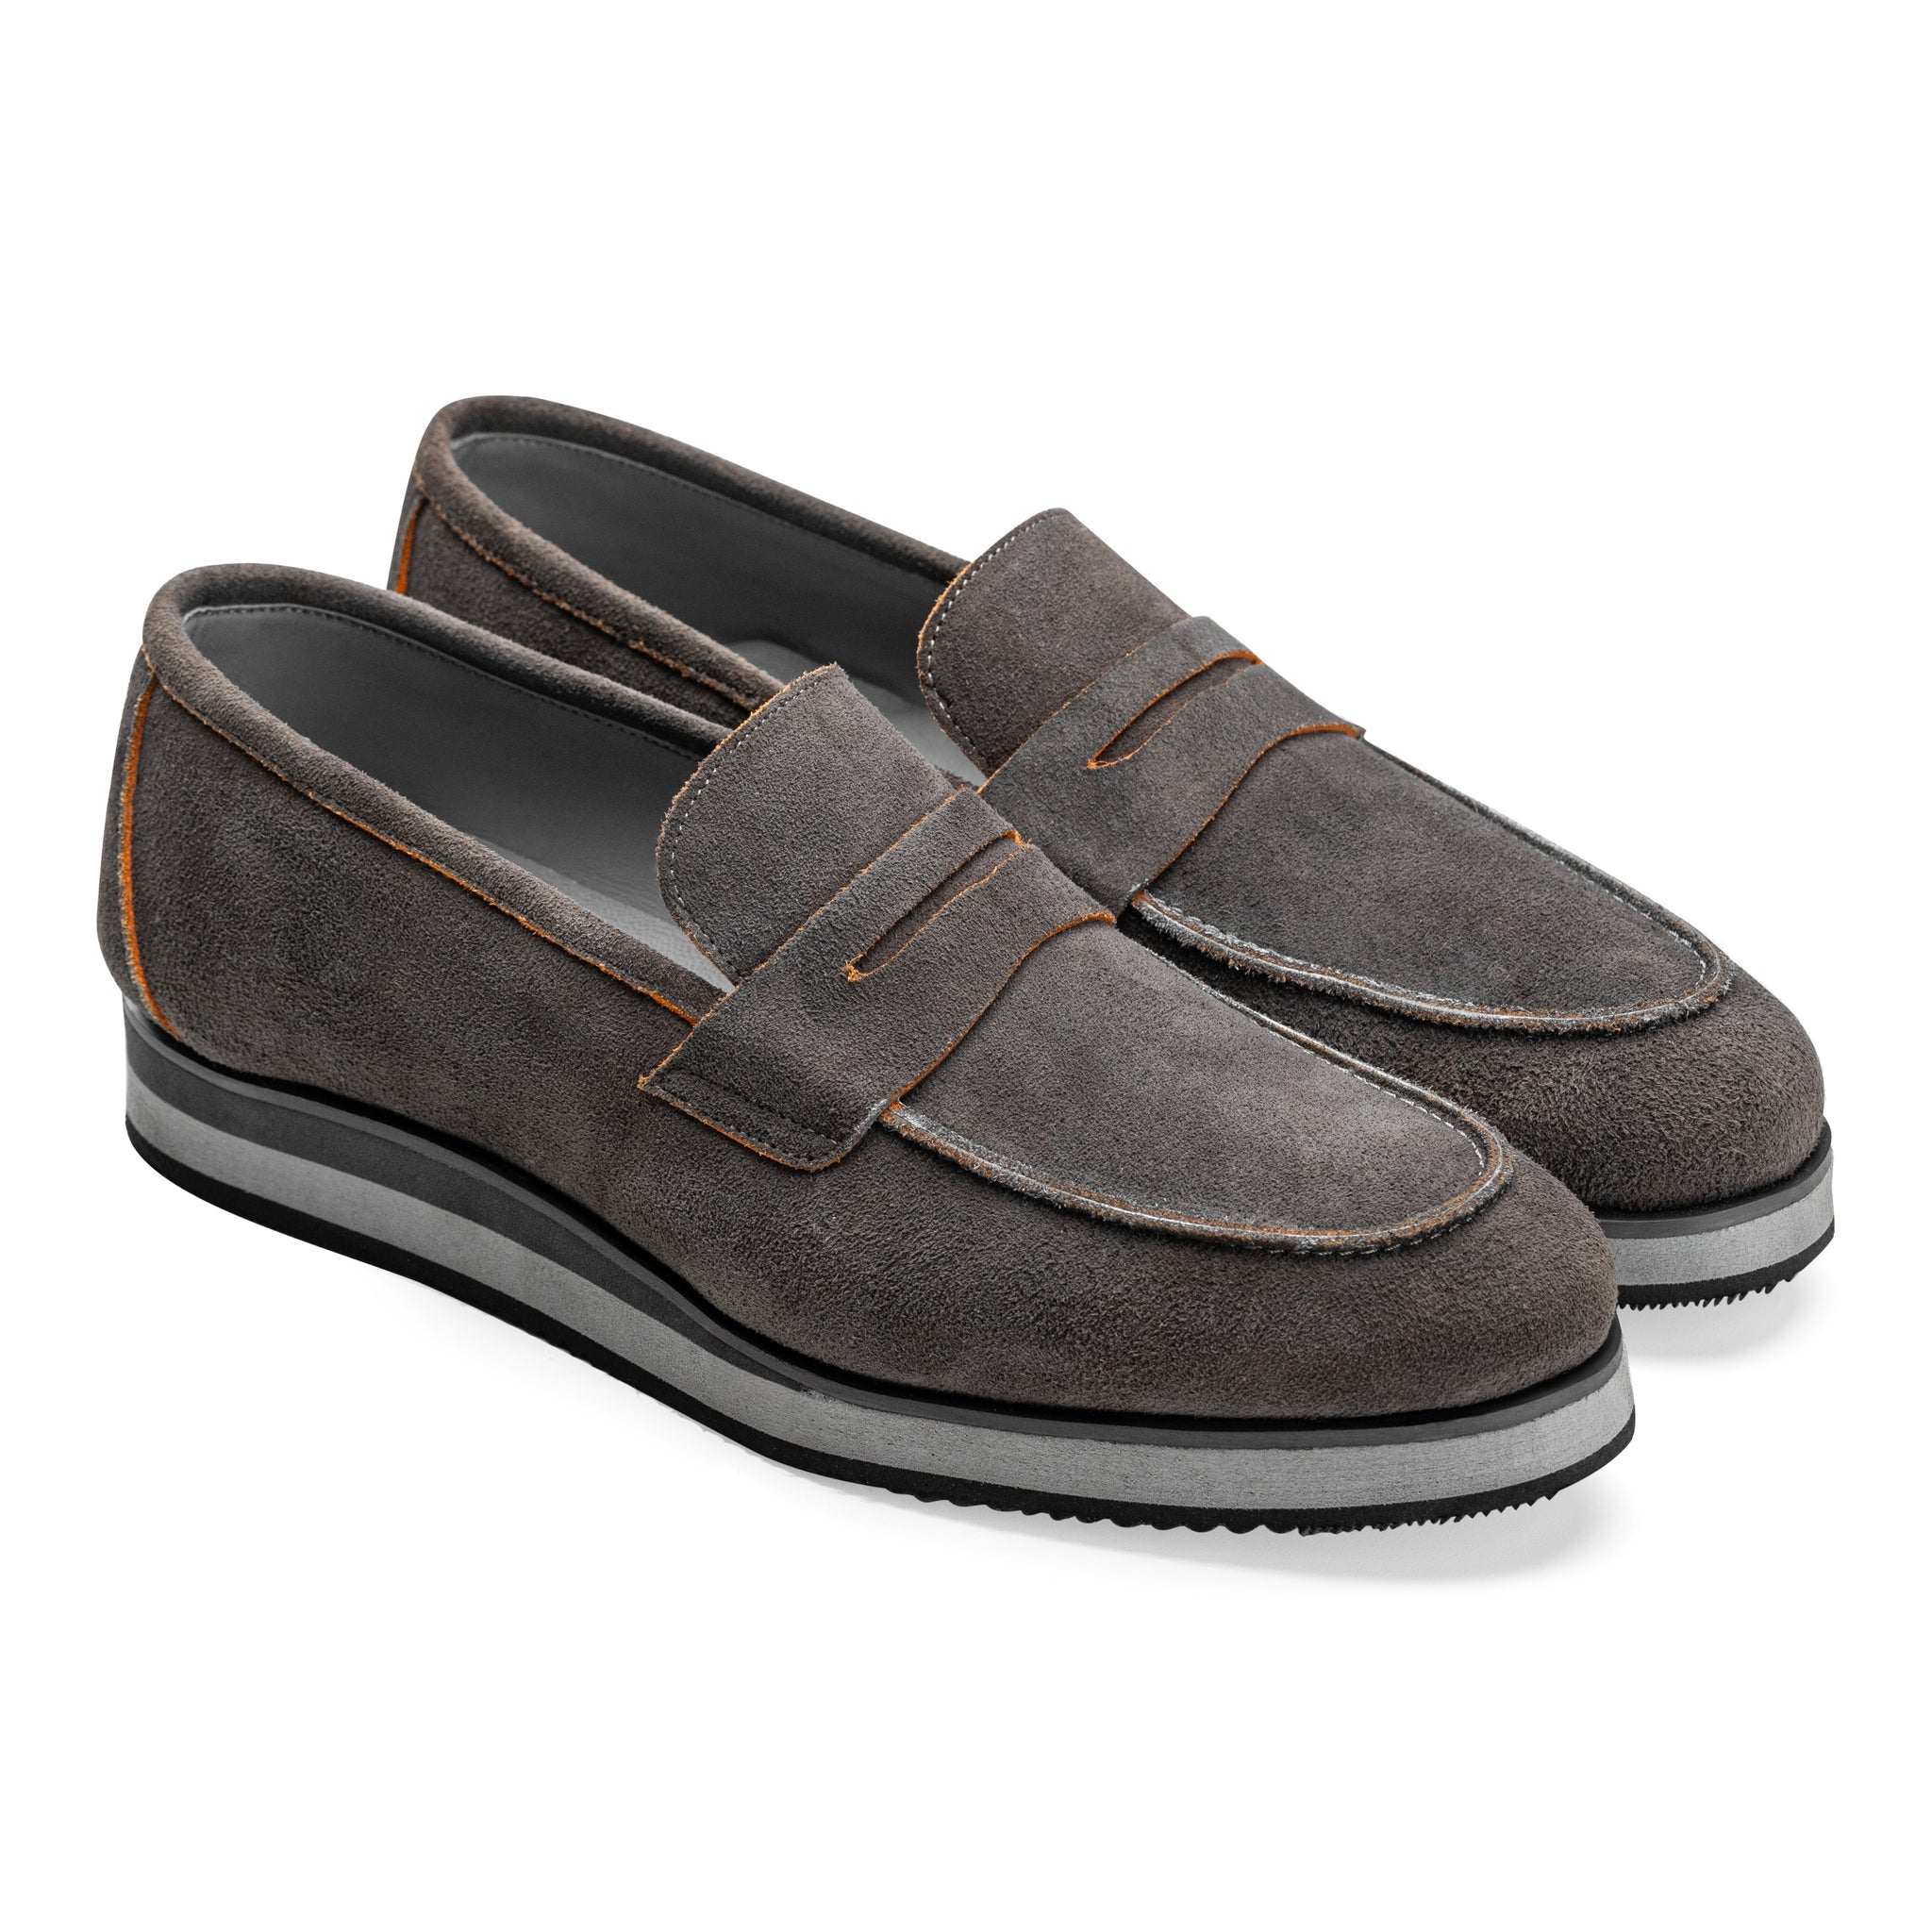 Moccasins| Suede calf leather rubber sole -GRAY